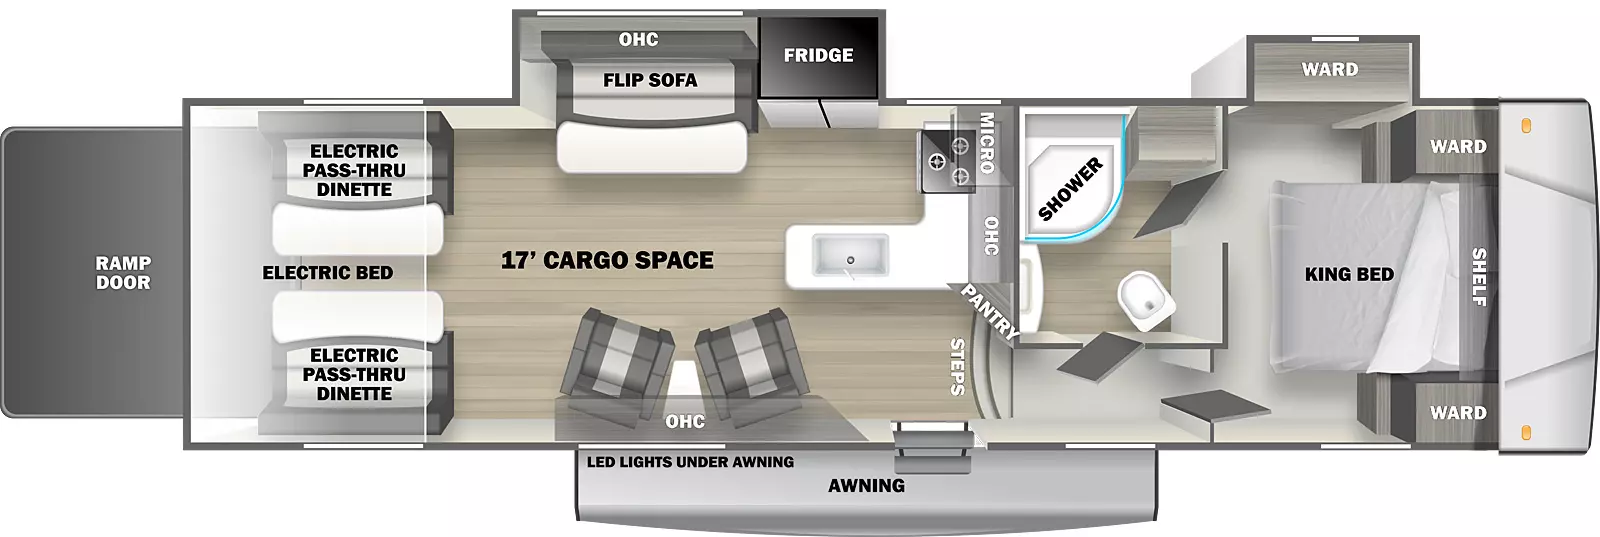 The Shockwave 32FWGDX is a toy hauler fifth wheel with one entry door, a rear ramp door, two slides on the off-door side, and 18' awning on the exterior. Inside, a walkaround king bed is located in the front of the unit, with wardrobe cabinets on either side, cabinets above the head of the bed, and a wardrobe vanity in a slideout on the off-door bedroom wall. There are two doors in the bedroom, one leading into the bathroom and one opening to a short hallway with steps leading into the main living area. The bathroom contains a sink, medicine cabinet, commode, linen cabinet, and radius glass shower. The kitchen area is located on the opposite side of the bathroom wall, which faces the rear of the unit. There is an L-shaped countertop with a sink, stovetop and oven, with cabinets and a microwave oven mounted overhead. Next to the kitchen area on the off-door wall is a slideout containing a double door refrigerator and flip sofa with half dinette table and overhead cabinets. Across from the slideout on the door side are additional overhead cabinets and a pair of upholstered chairs with small table between them. In the rear of the unit are two flip sofa benches, one on either side, with a split dinette table between them. These convert to a standard electric bed. This trailer provides 17' of interior cargo space.